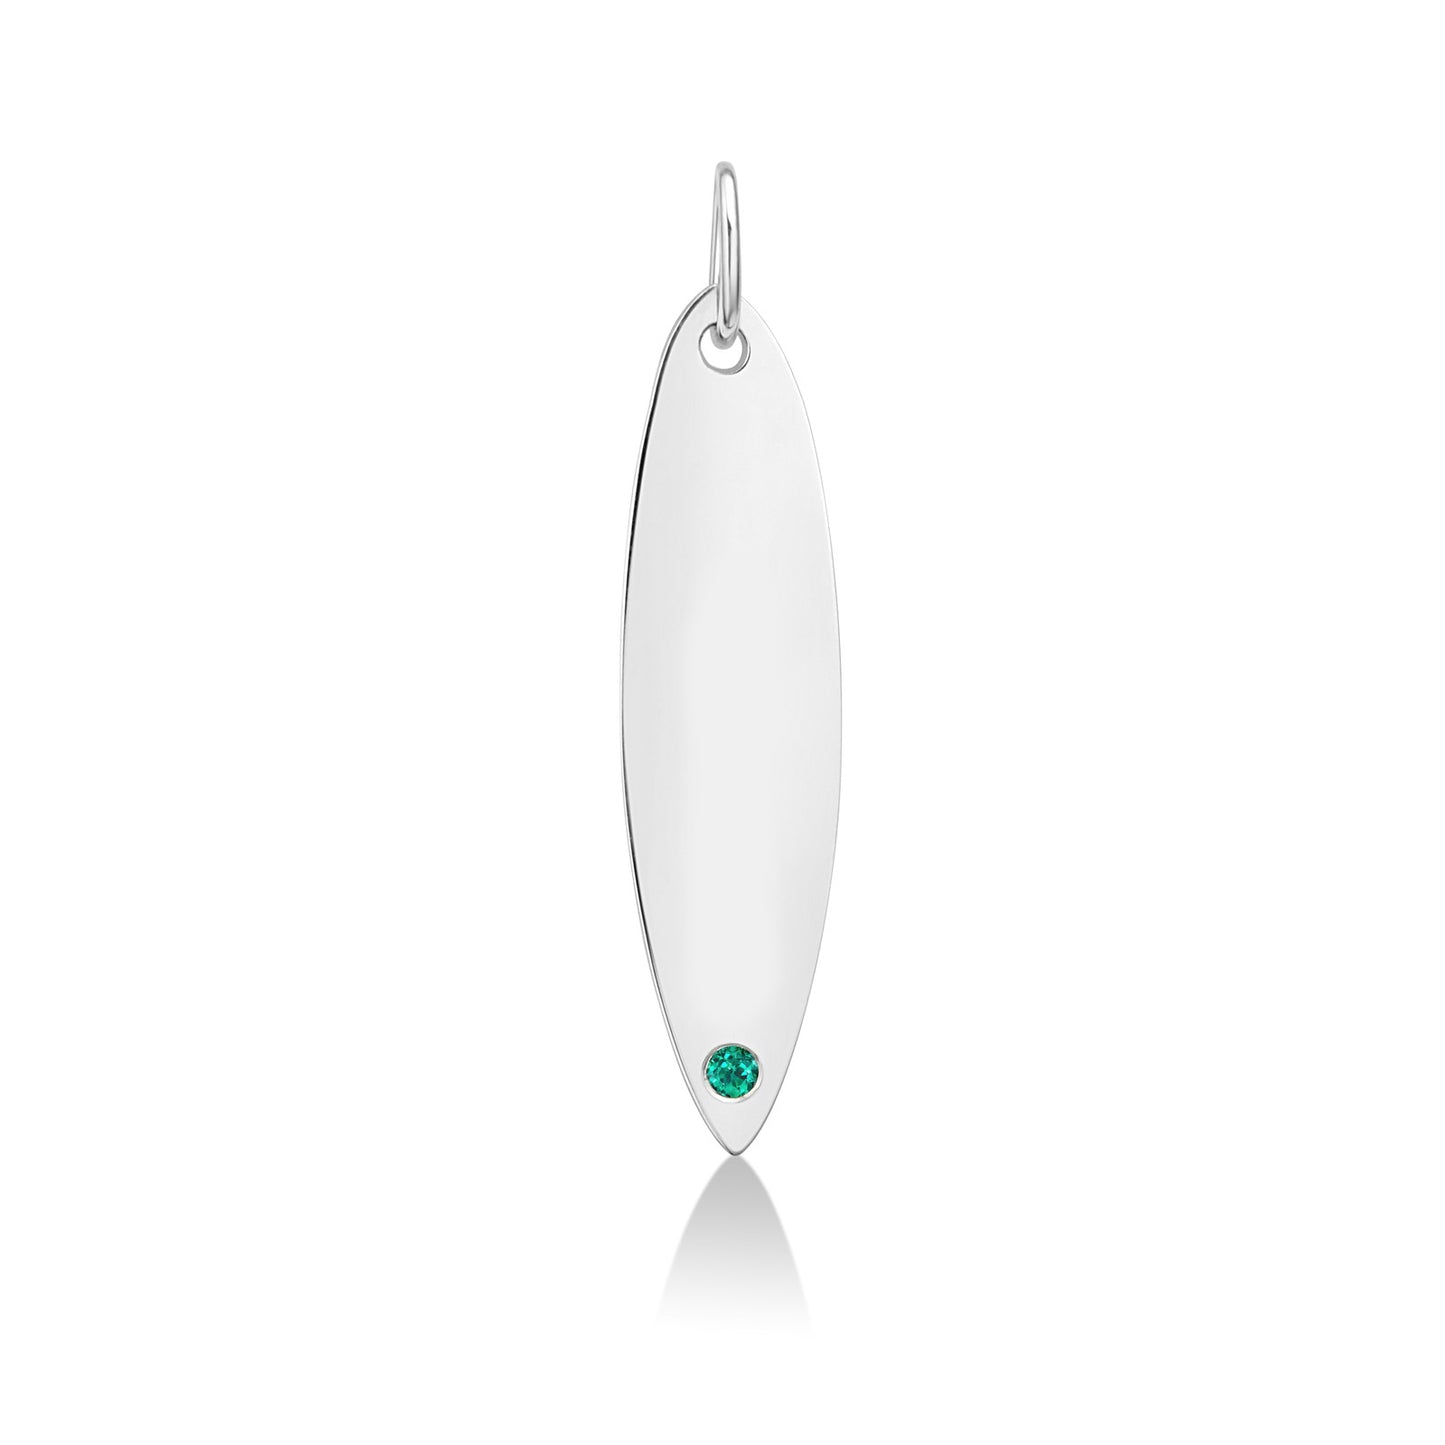 14k white gold surfboard charm lock with emerald